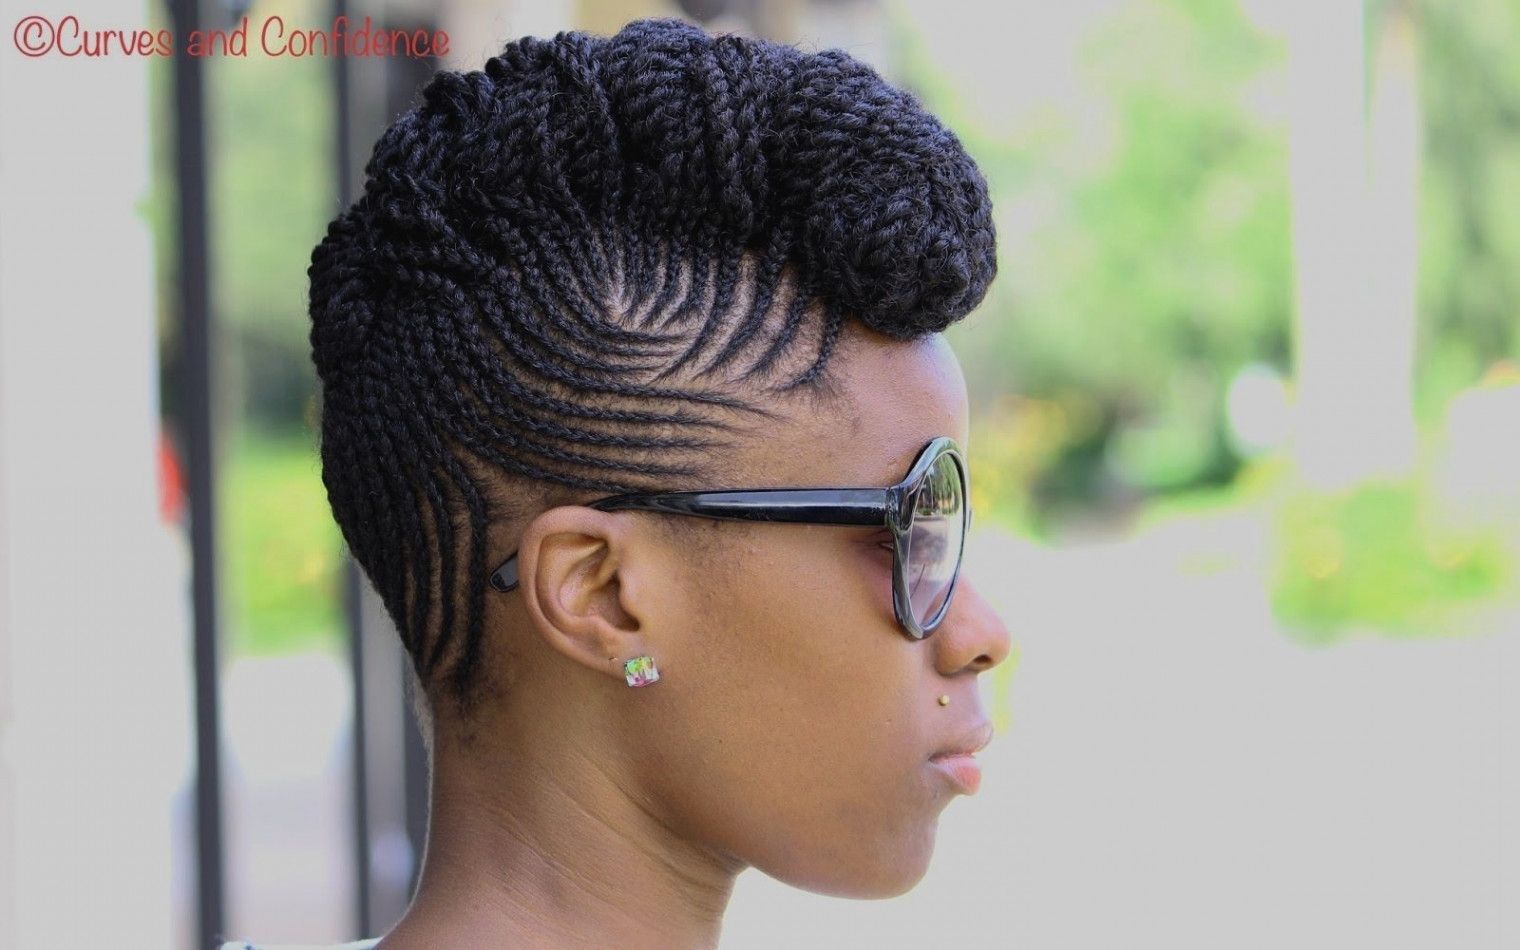 12 Top Risks Of Braided Updos On Natural With Regard To Well Known Braided Hairstyles With Real Hair (View 15 of 15)